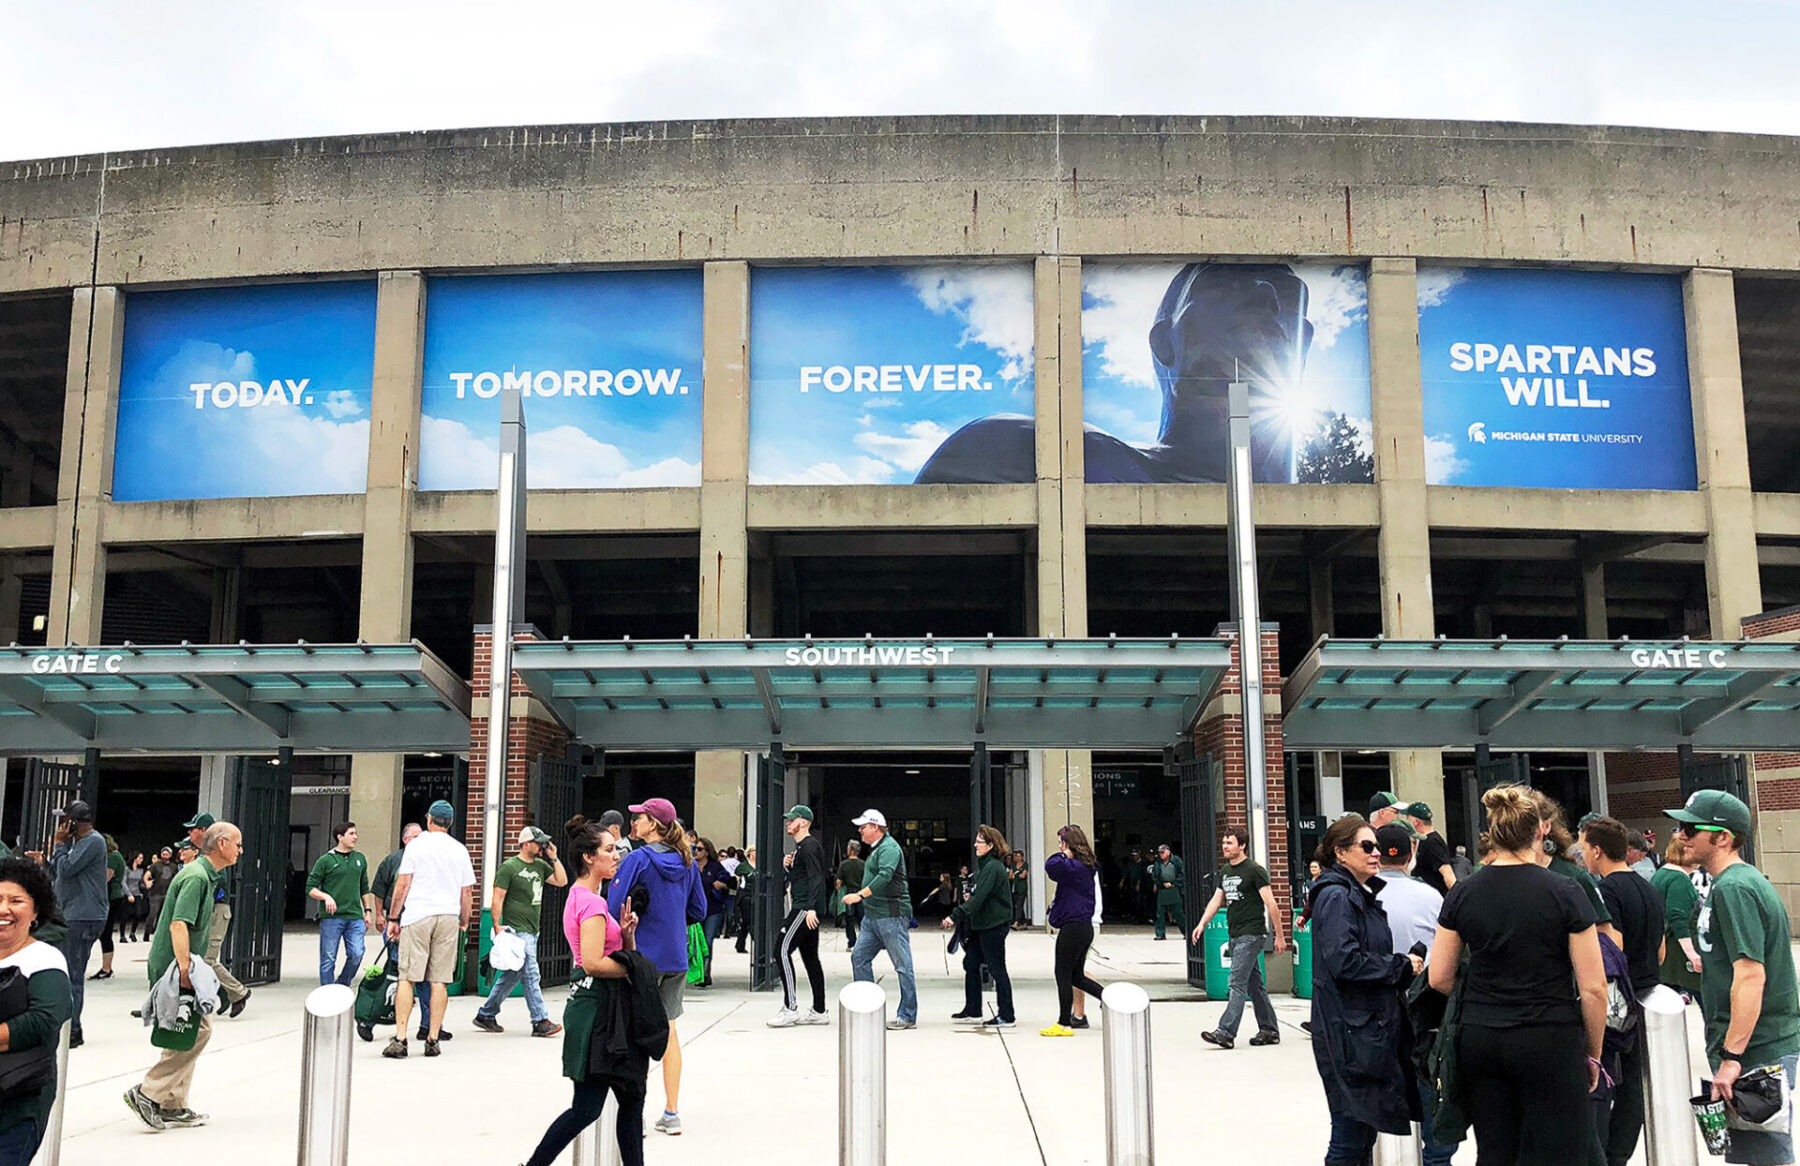 Spartan Stadium banners with headllne "Today. Tomorrow. Forever. Spartans Will."